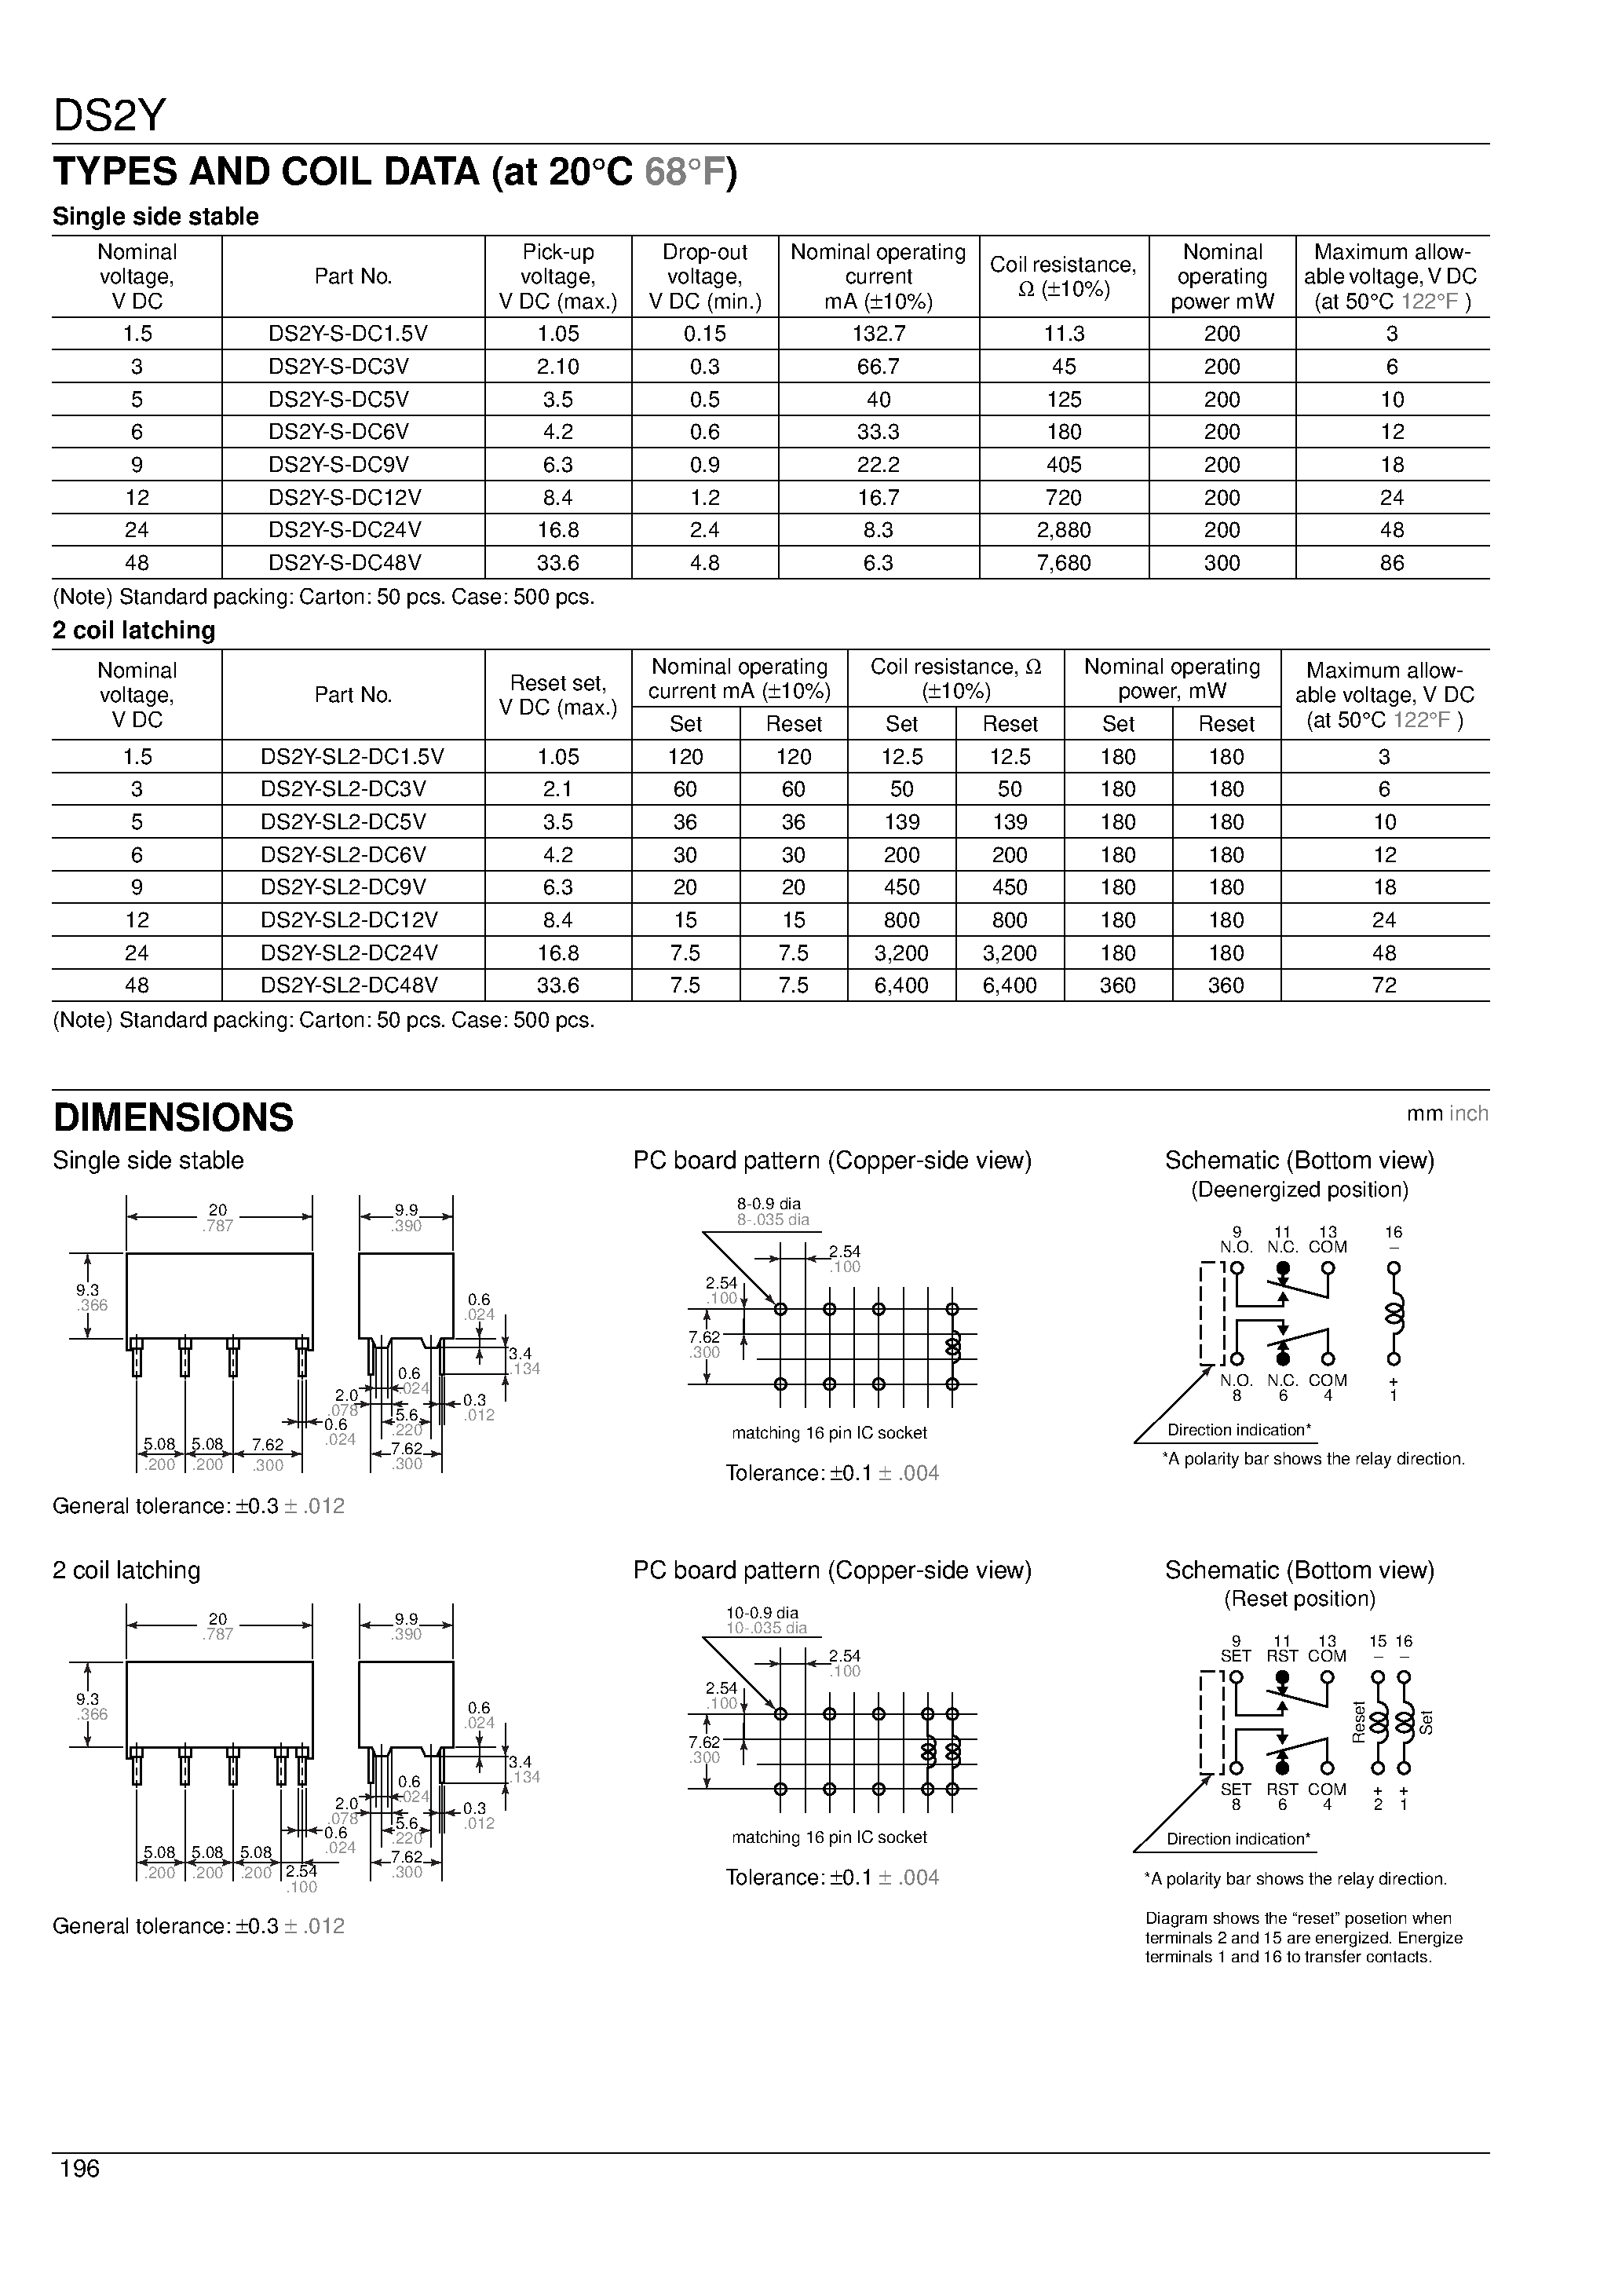 Datasheet DS2Y-S-DC48V - 2 Form C contact High sensitivity-200 mW nominal operating power page 2